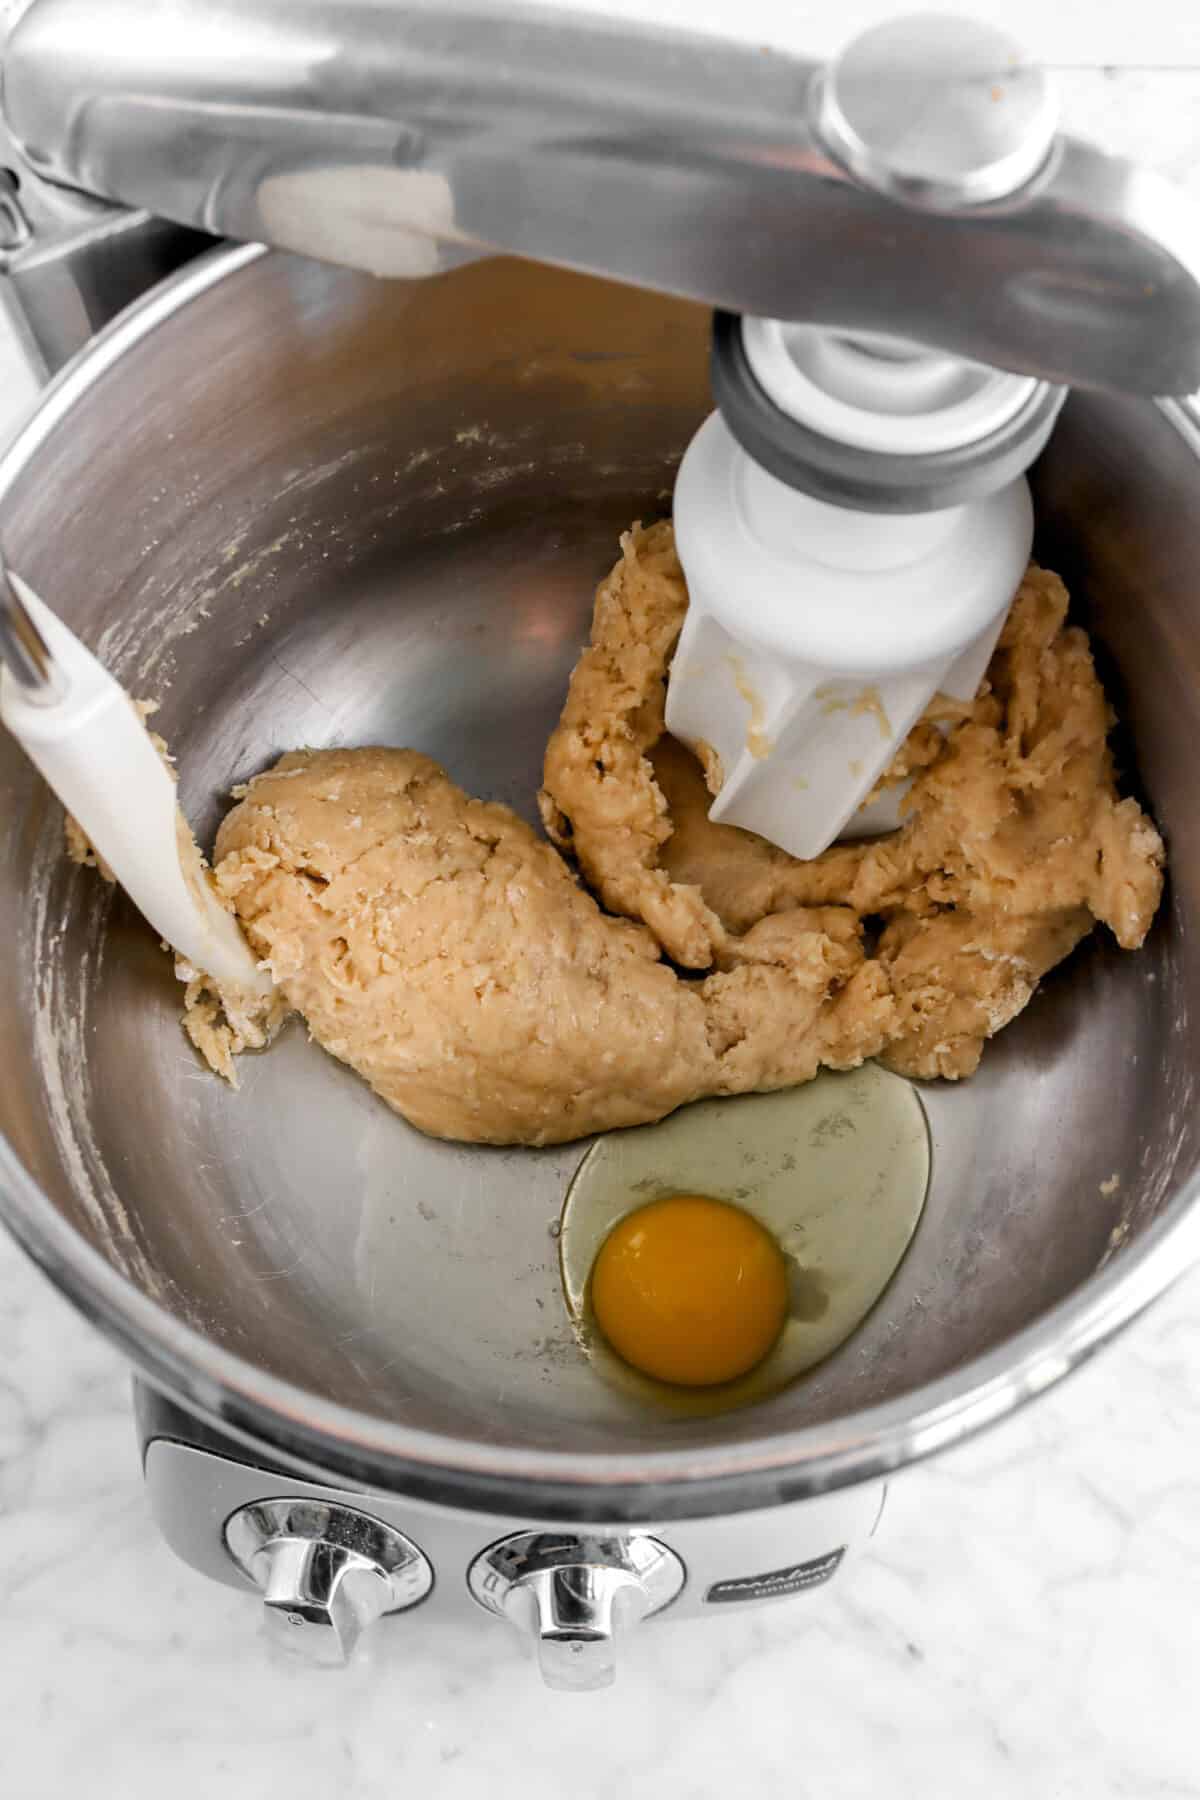 egg added to rough dough